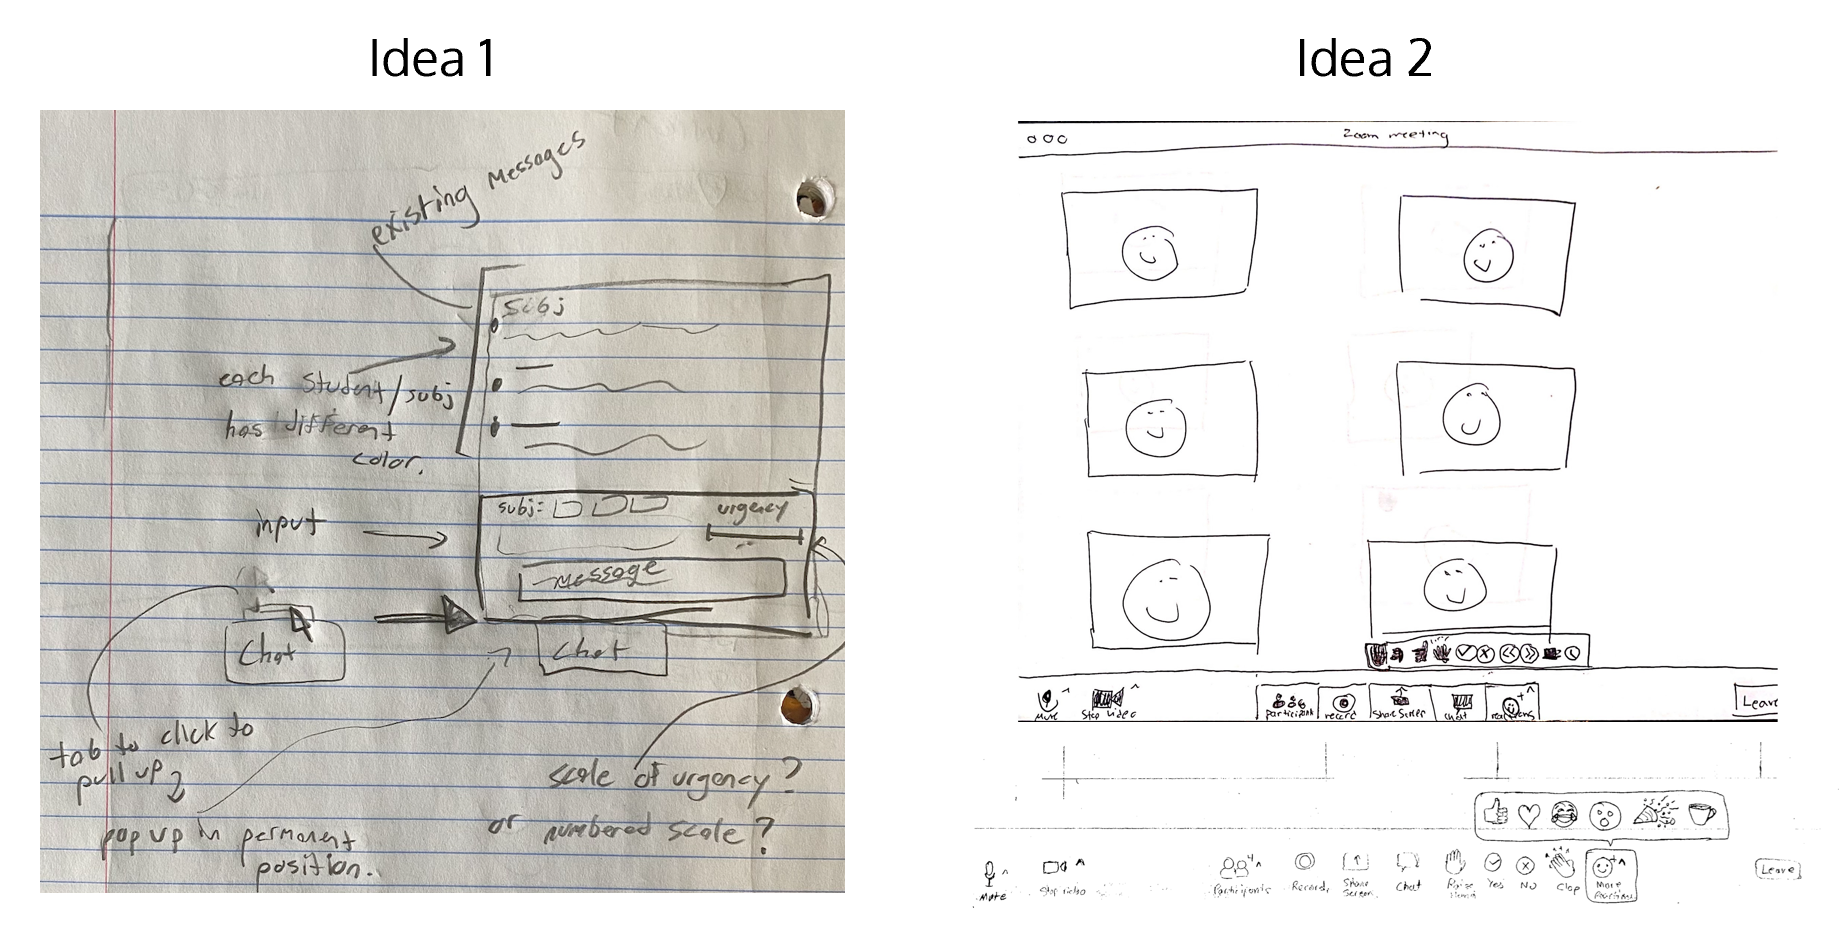 Low fidelity wireframes for ideas 1 and 2